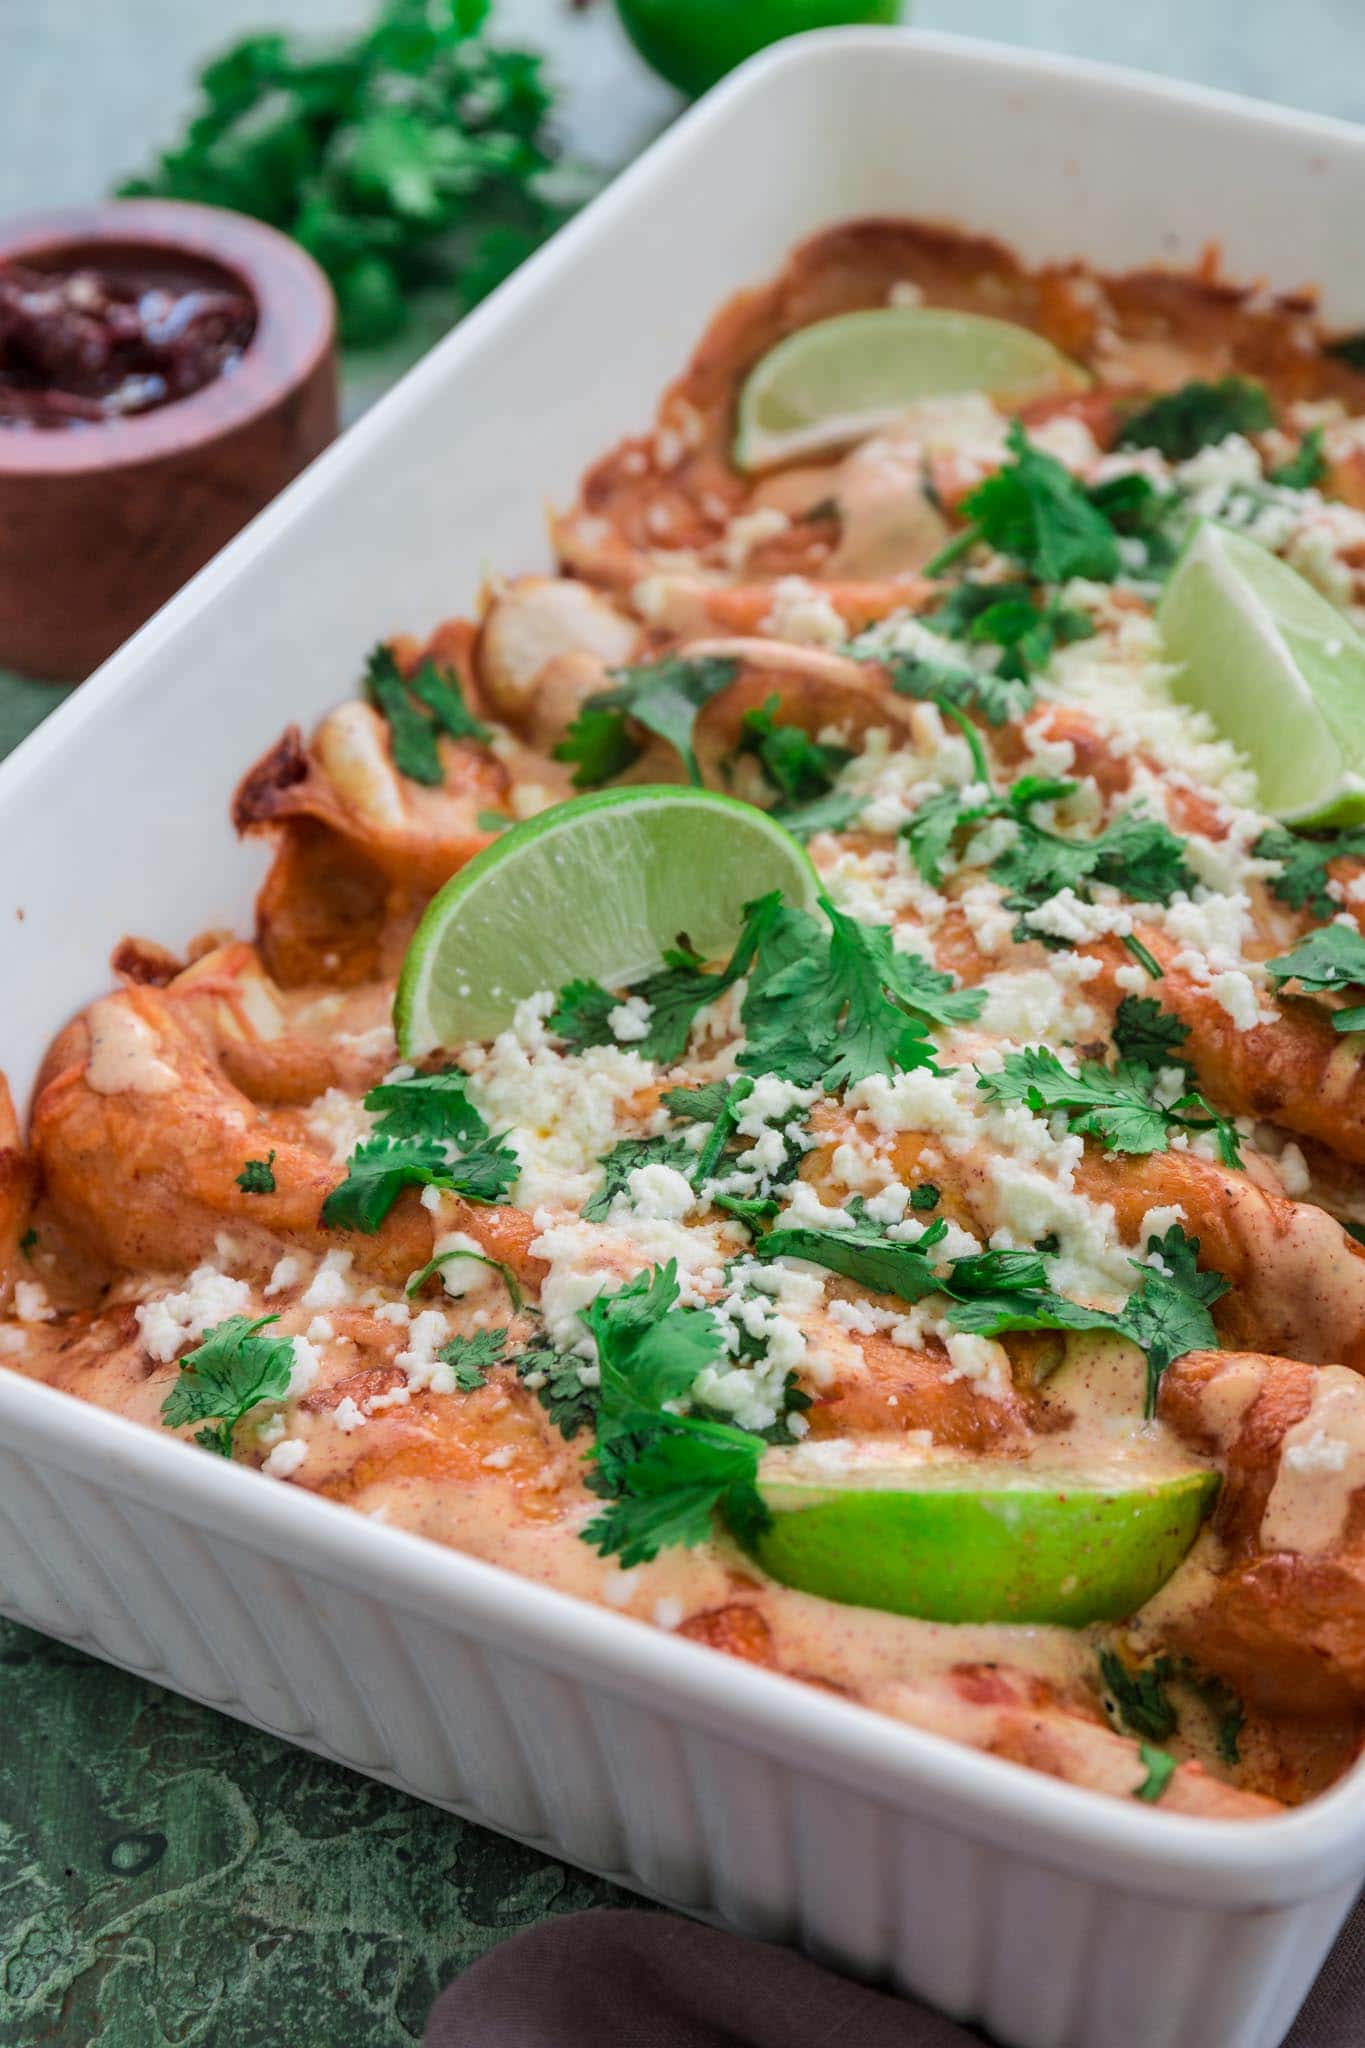 Chicken and Chorizo Enchiladas with Chipotle Crema Sauce | www.oliviascuisine.com | If you like it hot, these Chicken and Chorizo Enchiladas are for you! Spicy, delicious, and smothered with the creamiest Chipotle Crema Sauce. They will knock your socks off! (Recipe and food photography by @oliviascuisine.)